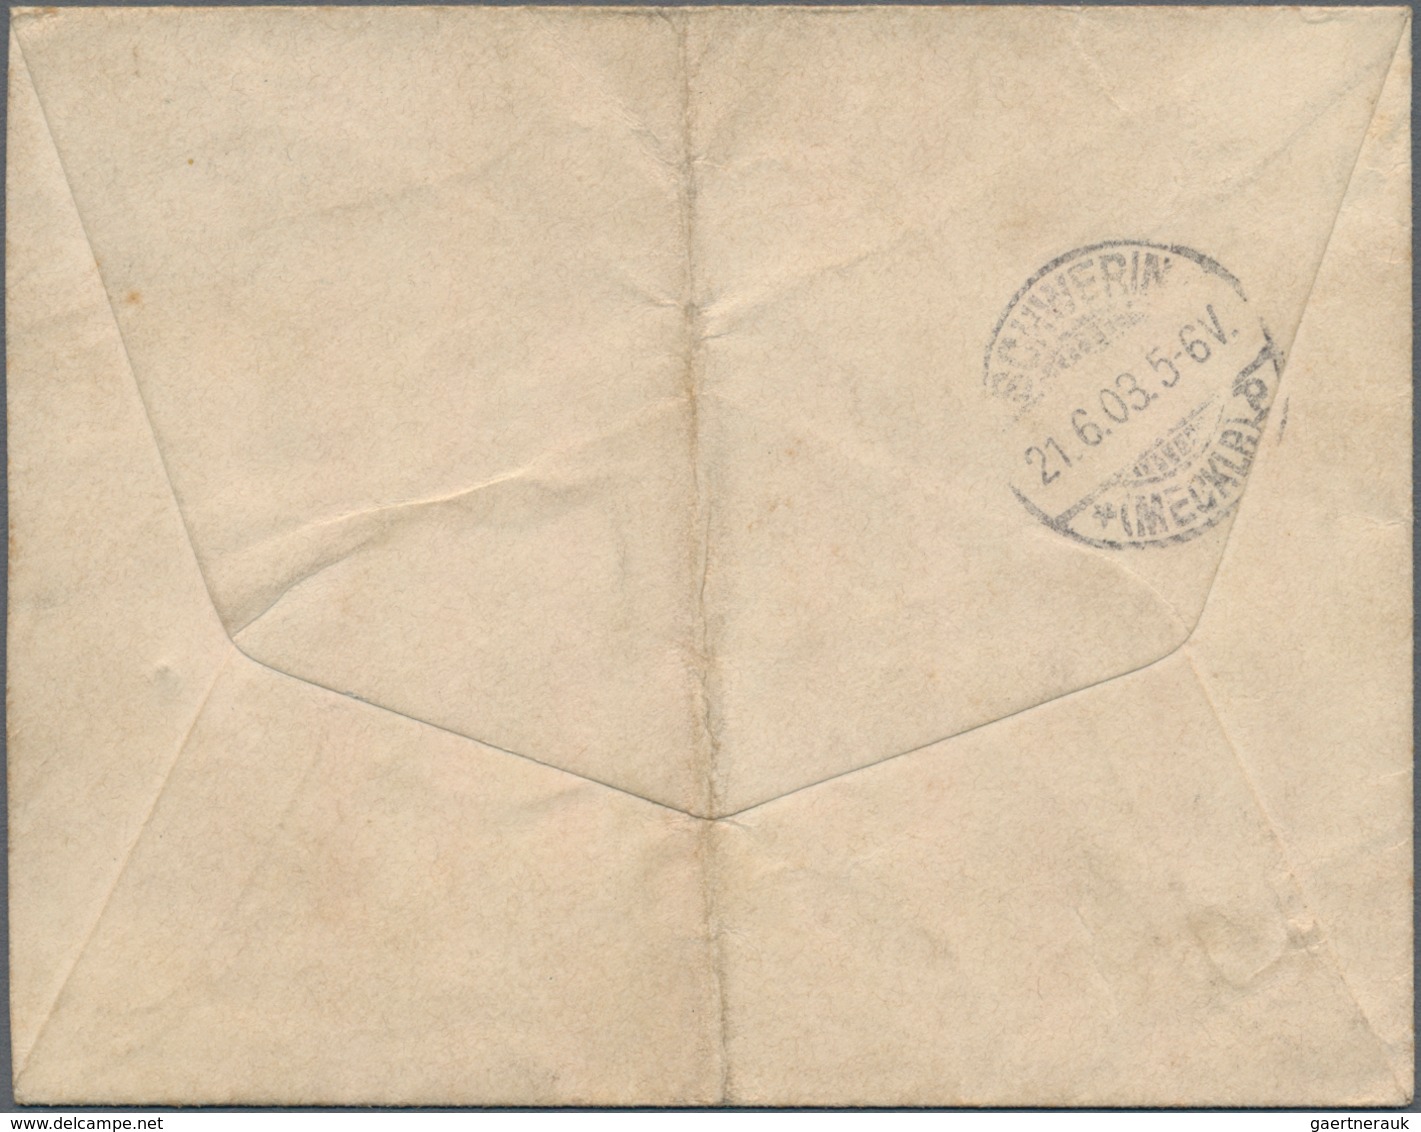 Russische Post in China: 1899/1910, covers (2), ppc (3) and used stationery (1) from Peking, Tientsi